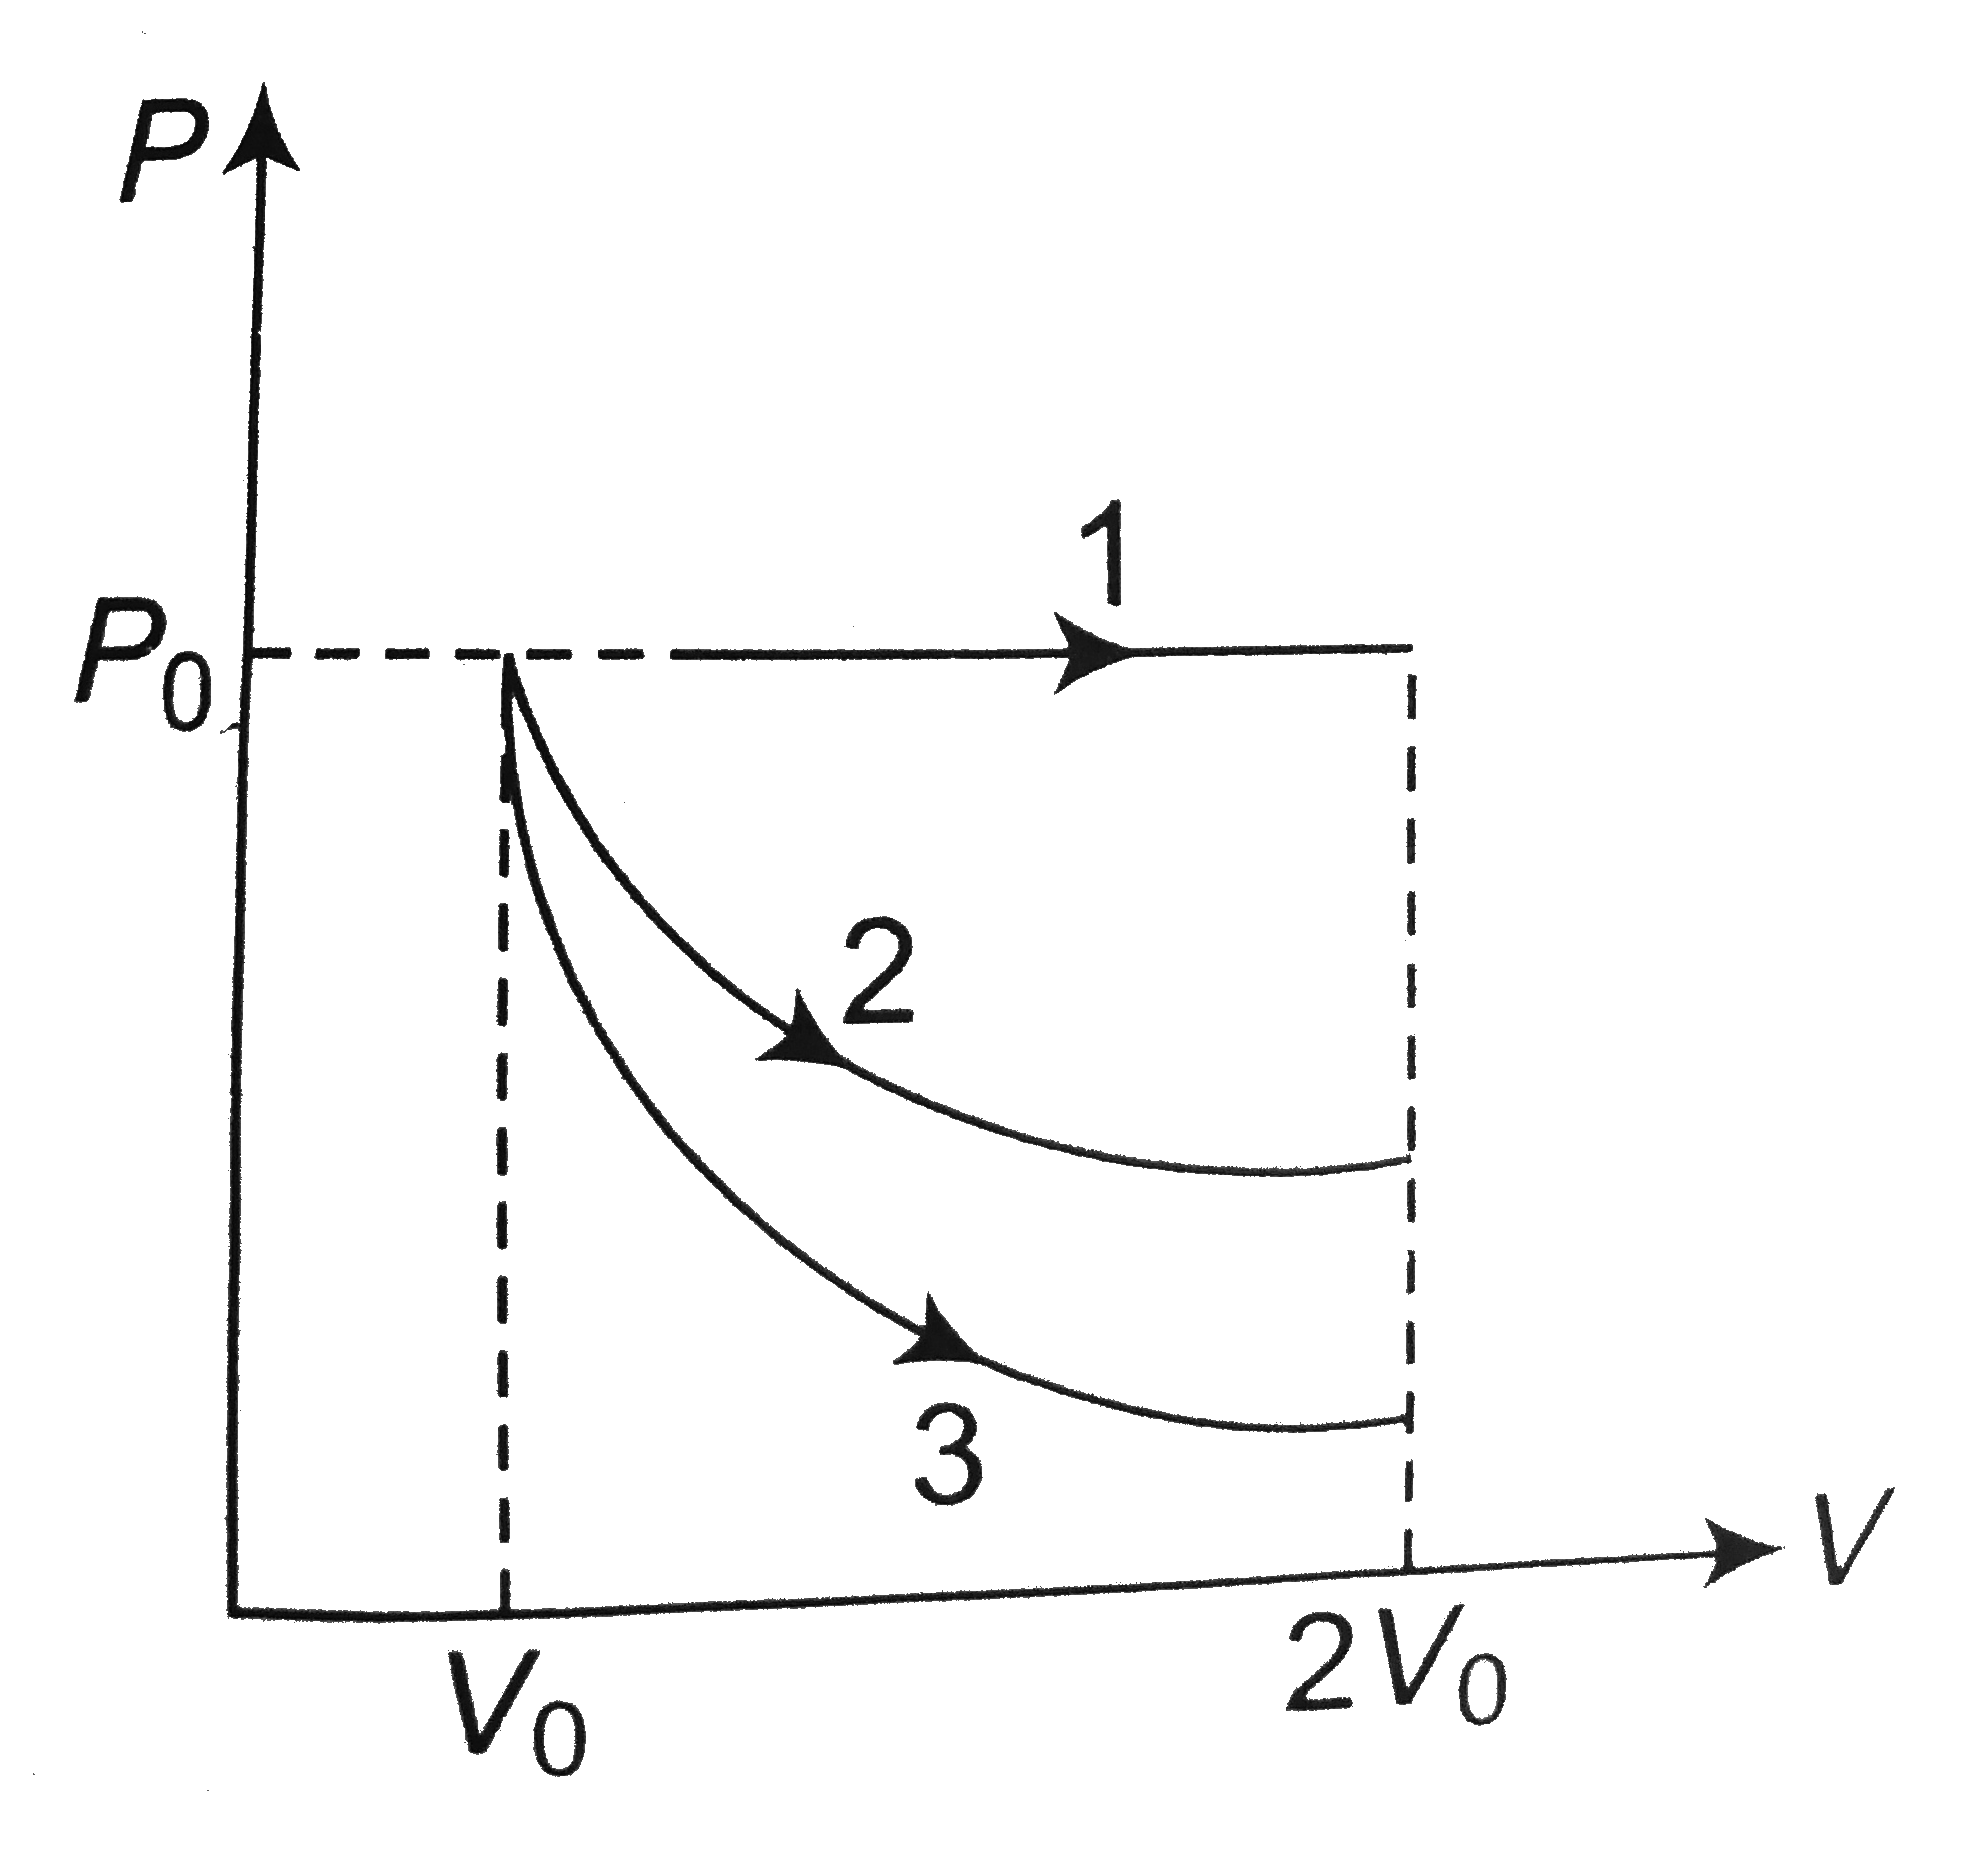 A gas is expanded from volume V(0) = 2V(0) under three different processes. Process 1 is isobaric process, process 2 is isothermal and process 3 is adiabatic. Let DeltaU(1), DeltaU(2) and DeltaU(3) be the change in internal energy of the gas in these three processes. then